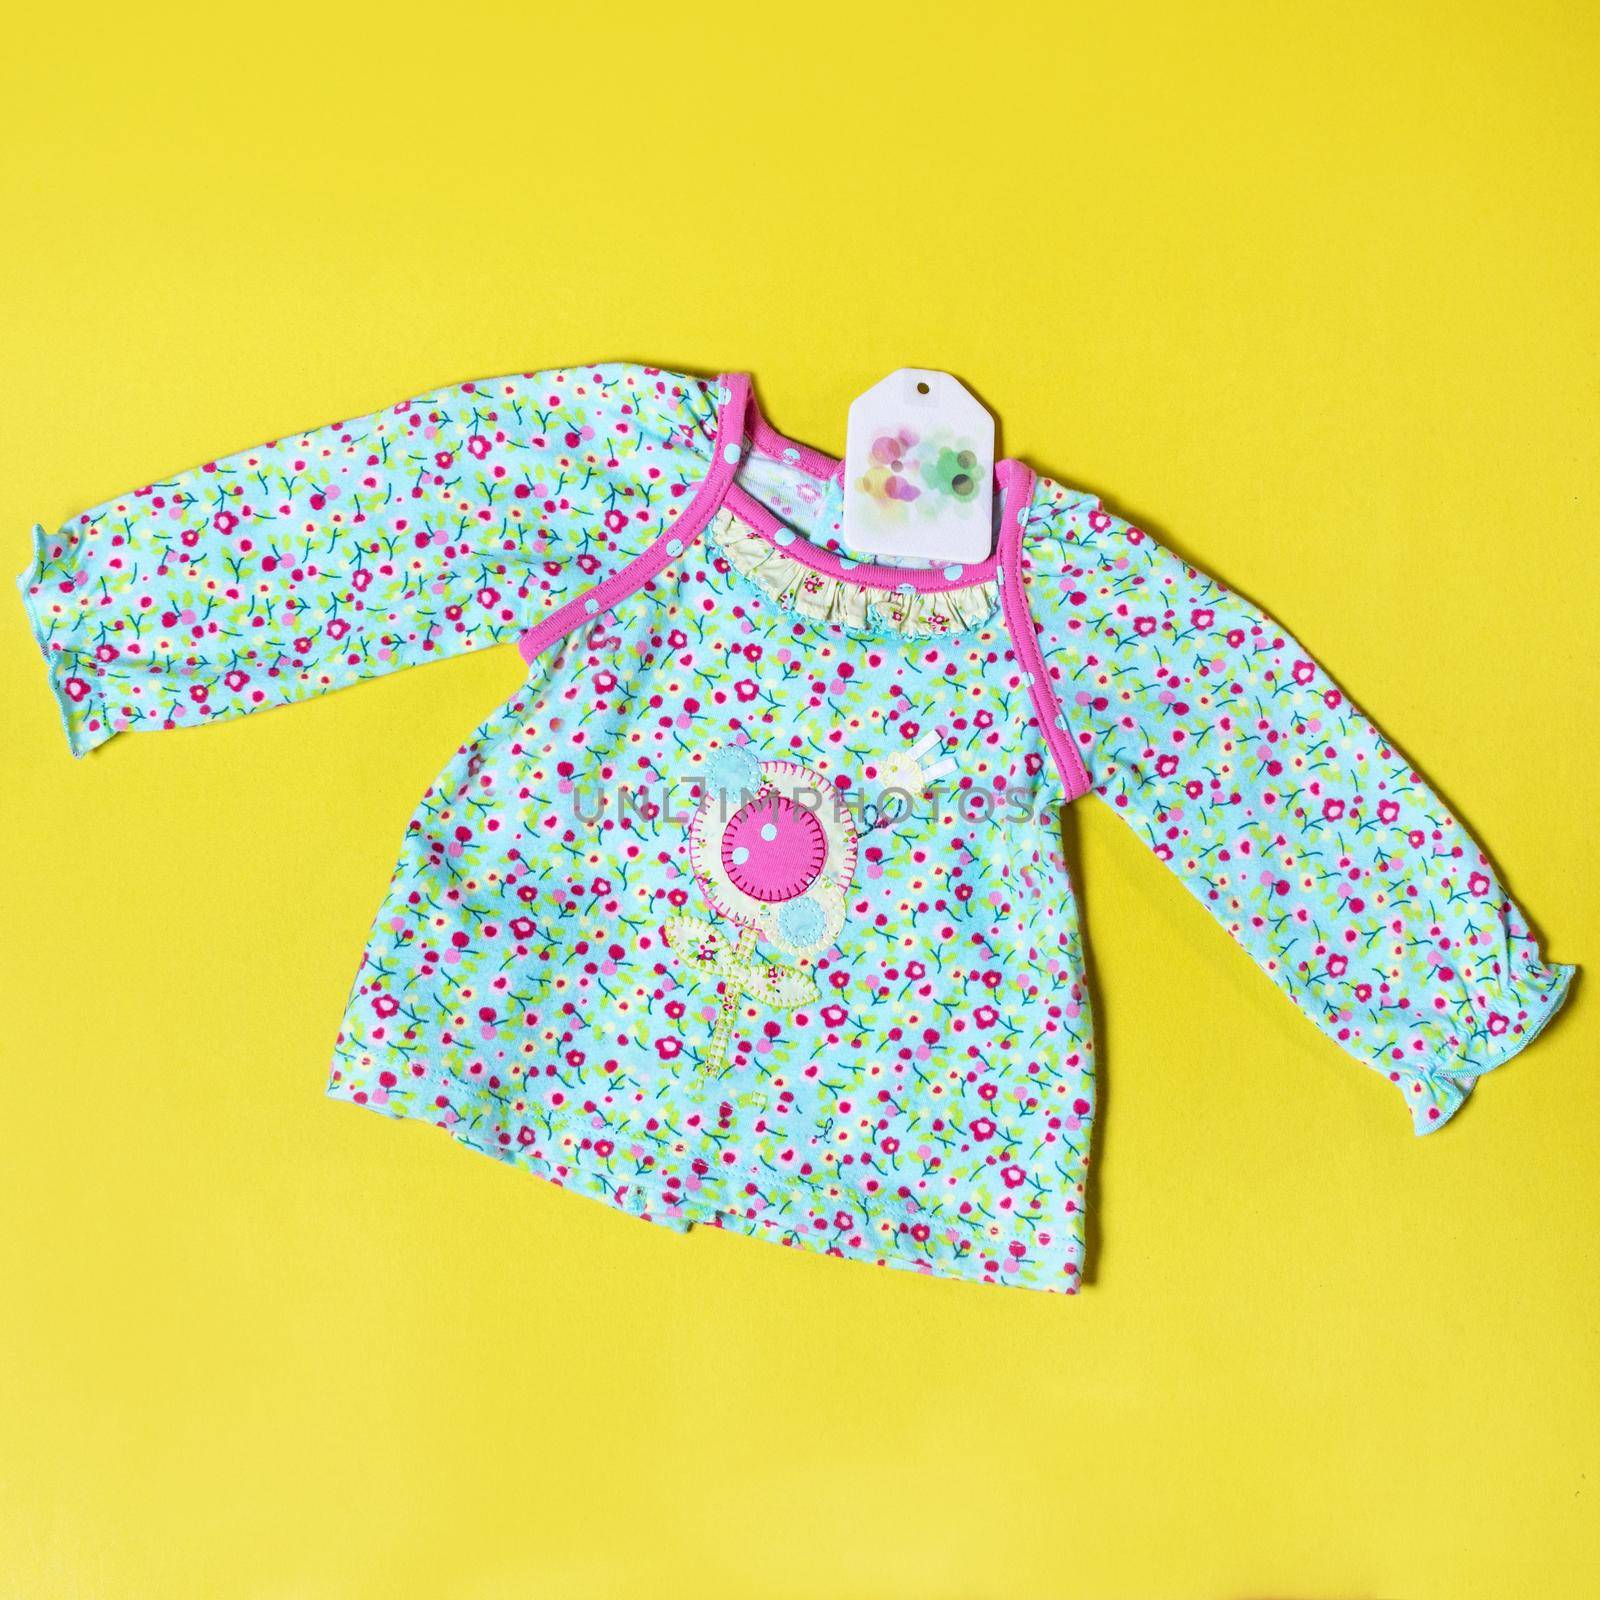 Baby girl clothes and toy stuff, baby fashion concept by ferhad